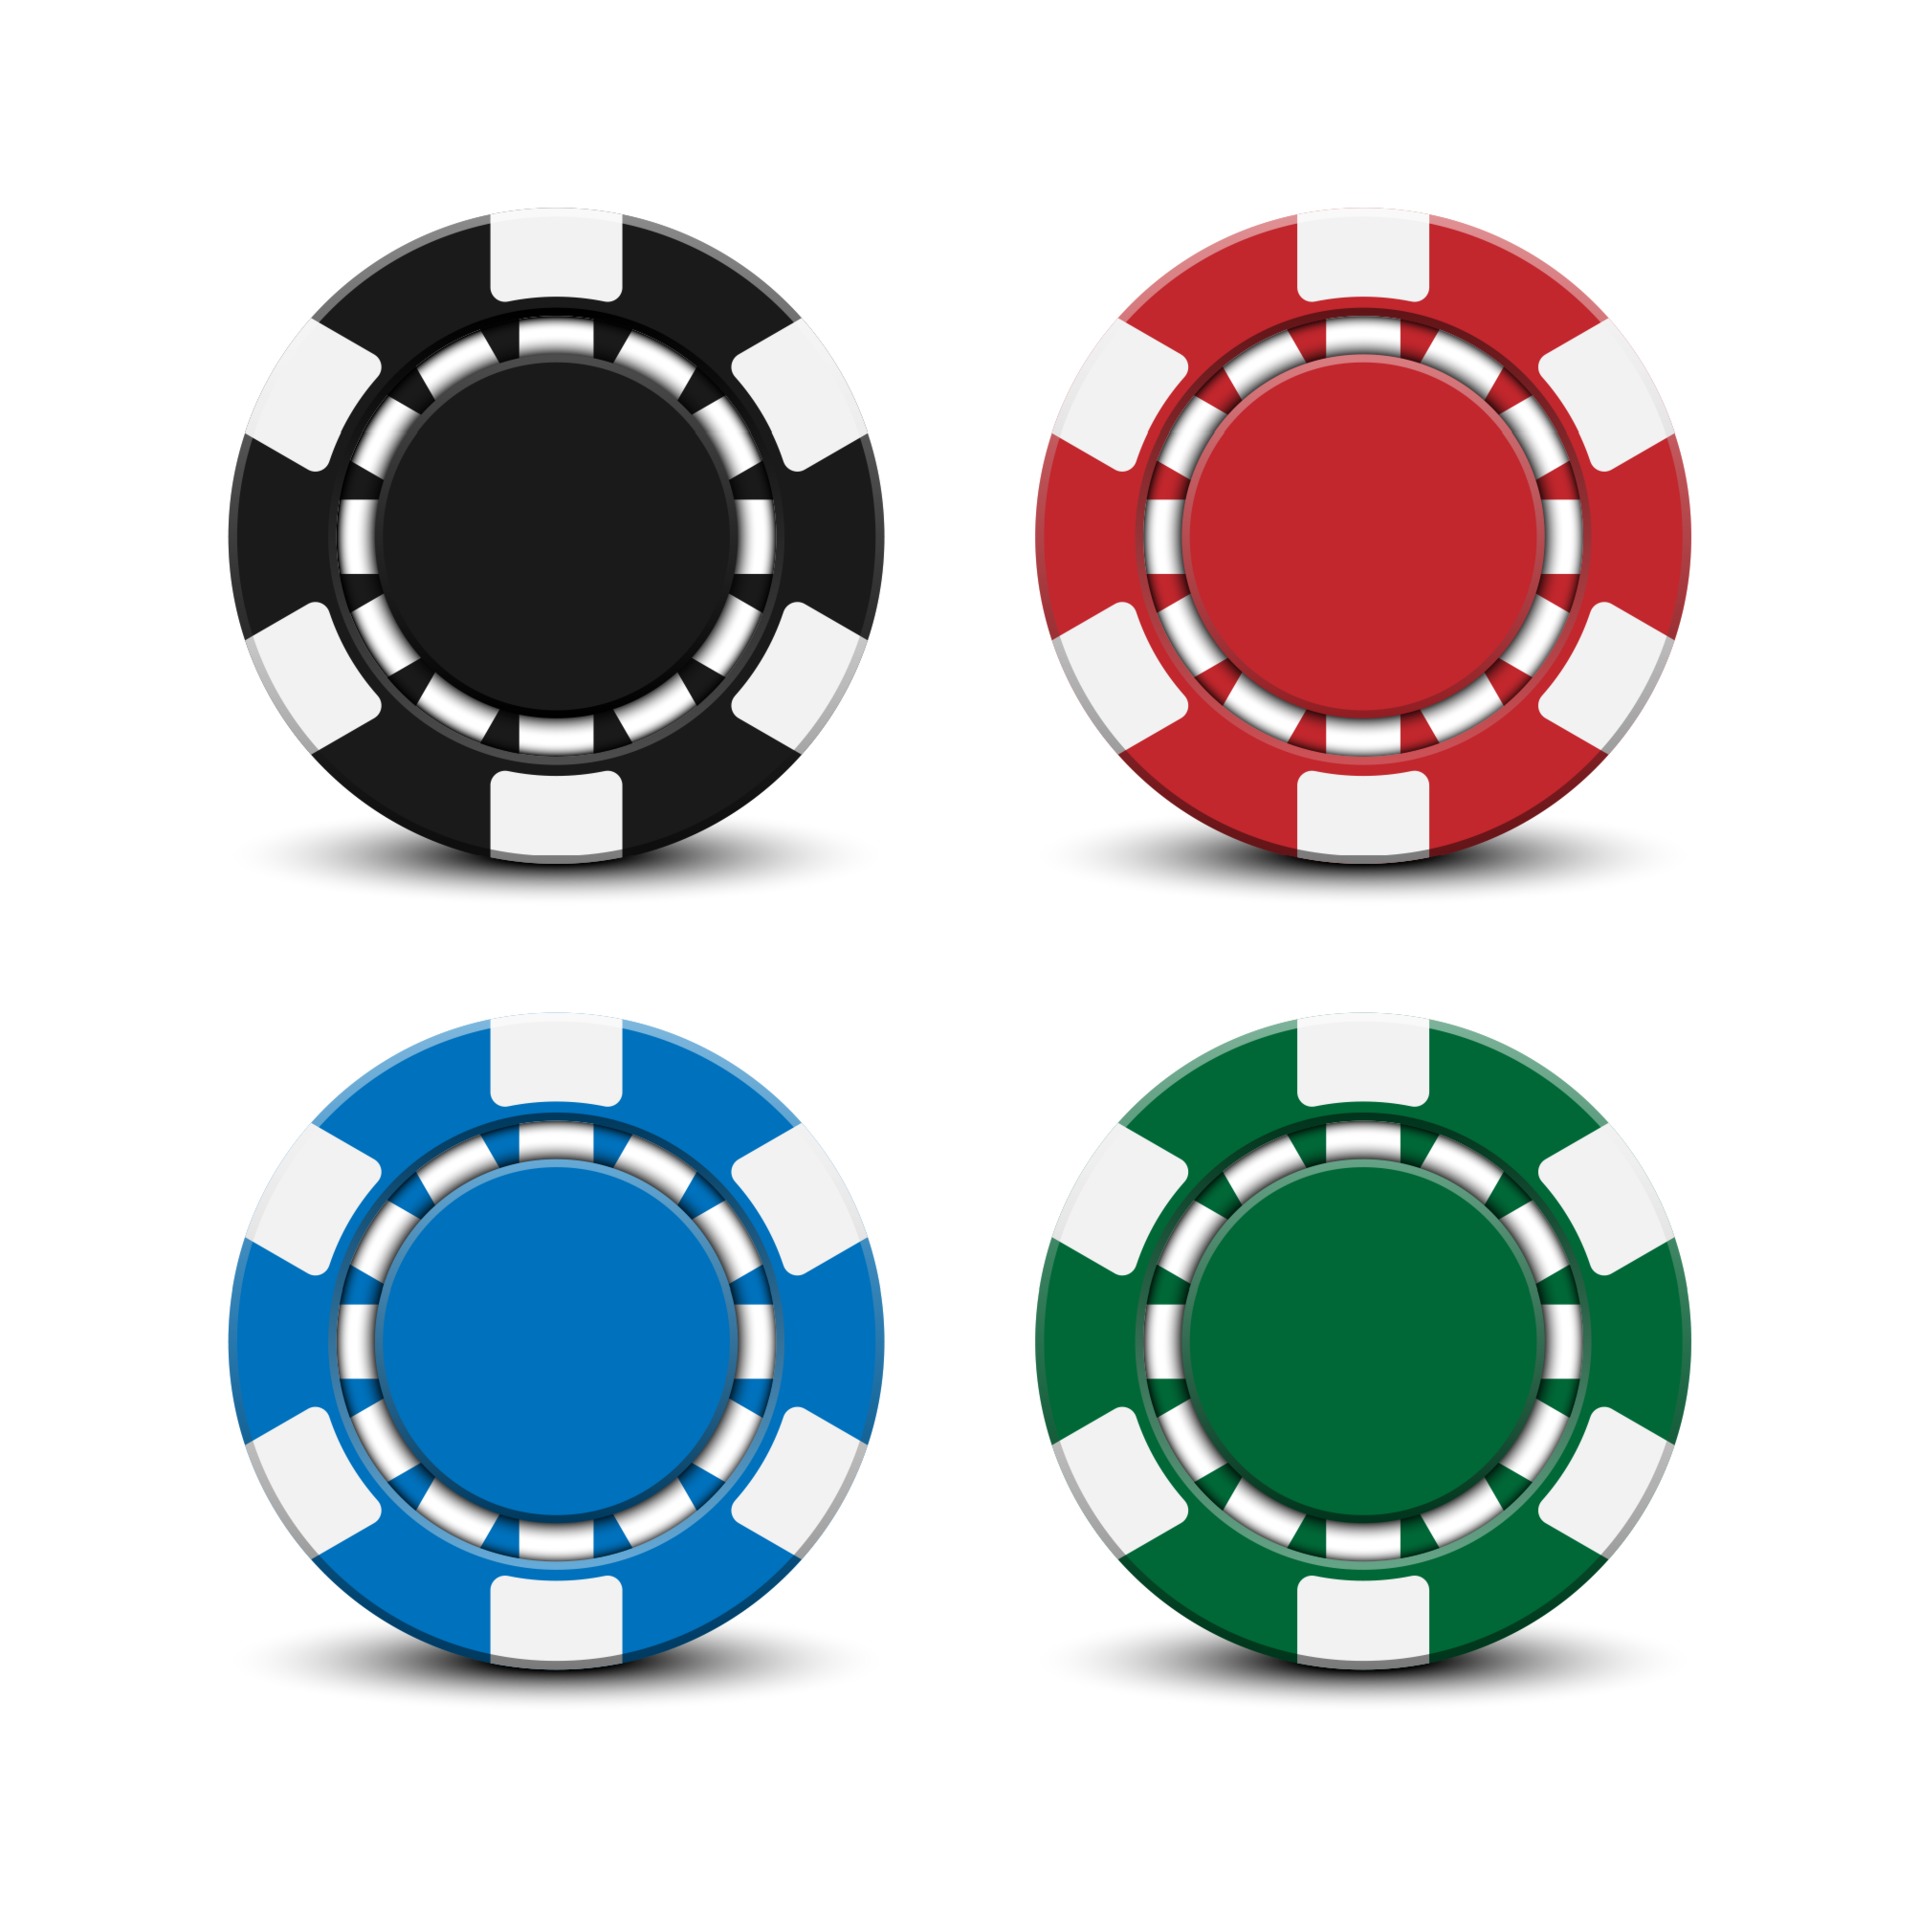 Poker Chip Art, Icons, for Download